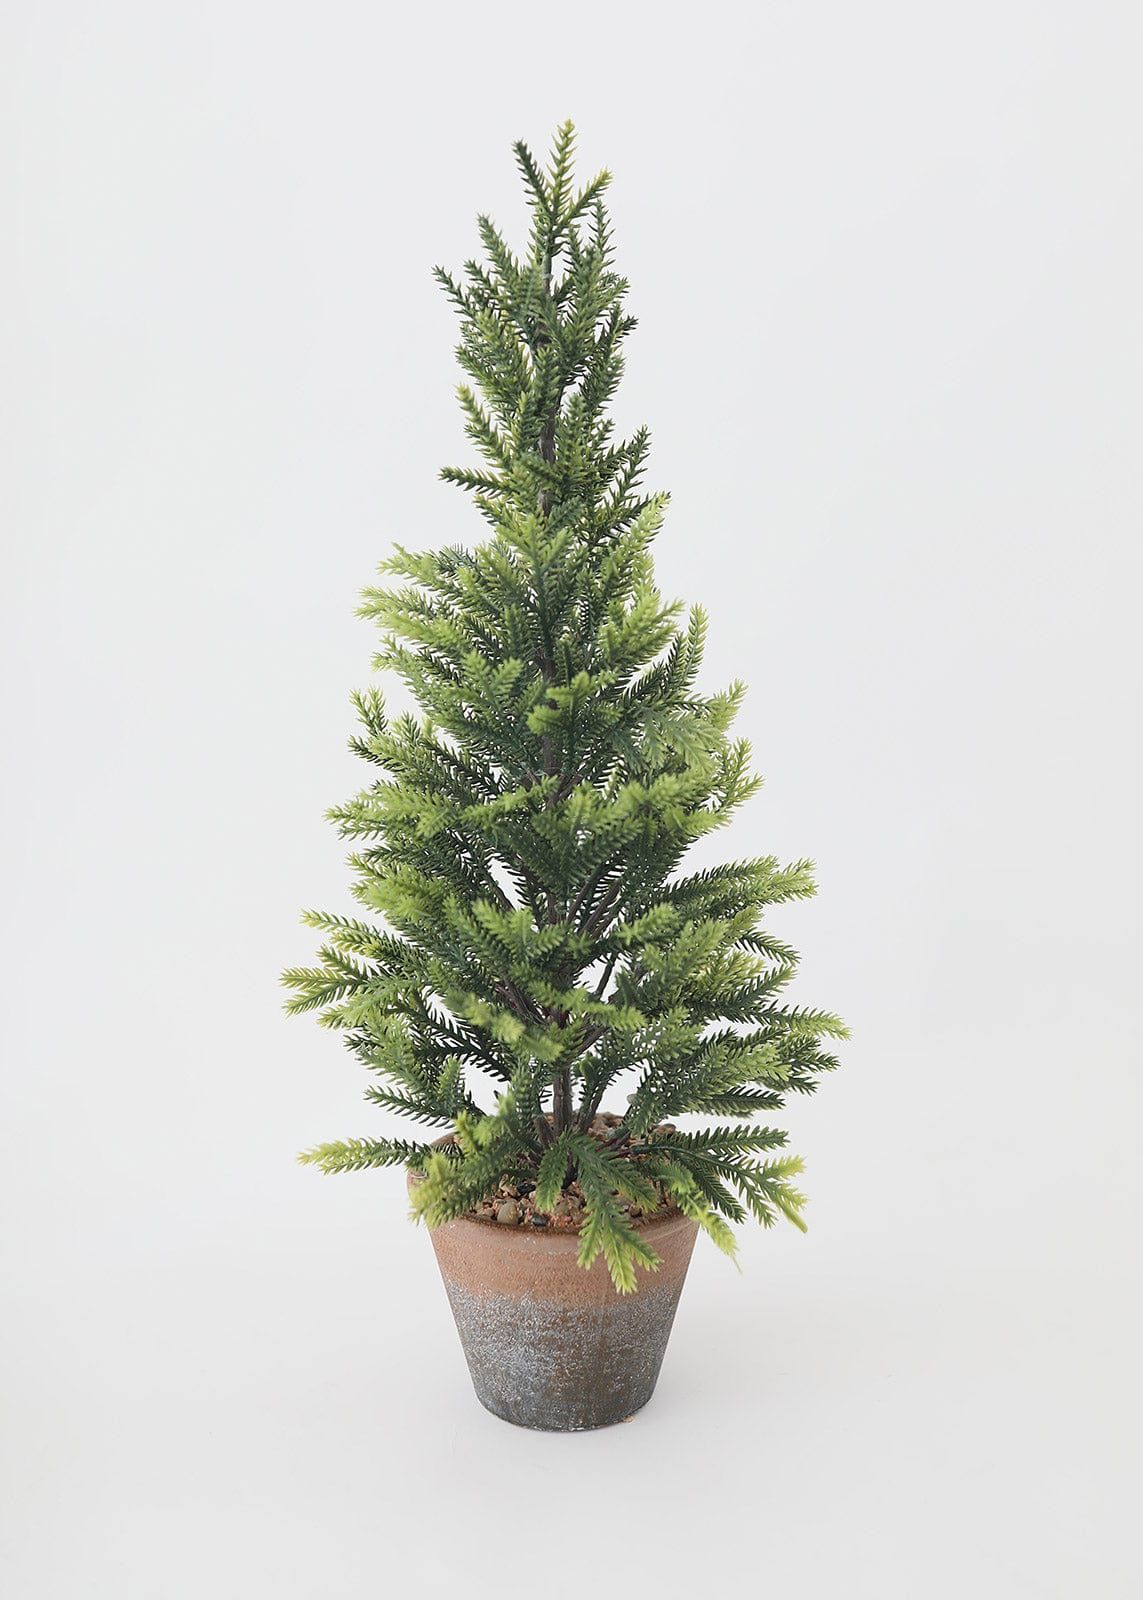 Fake Frosted Mini Spruce Christmas Tree in Pot - 23" | Afloral (US)